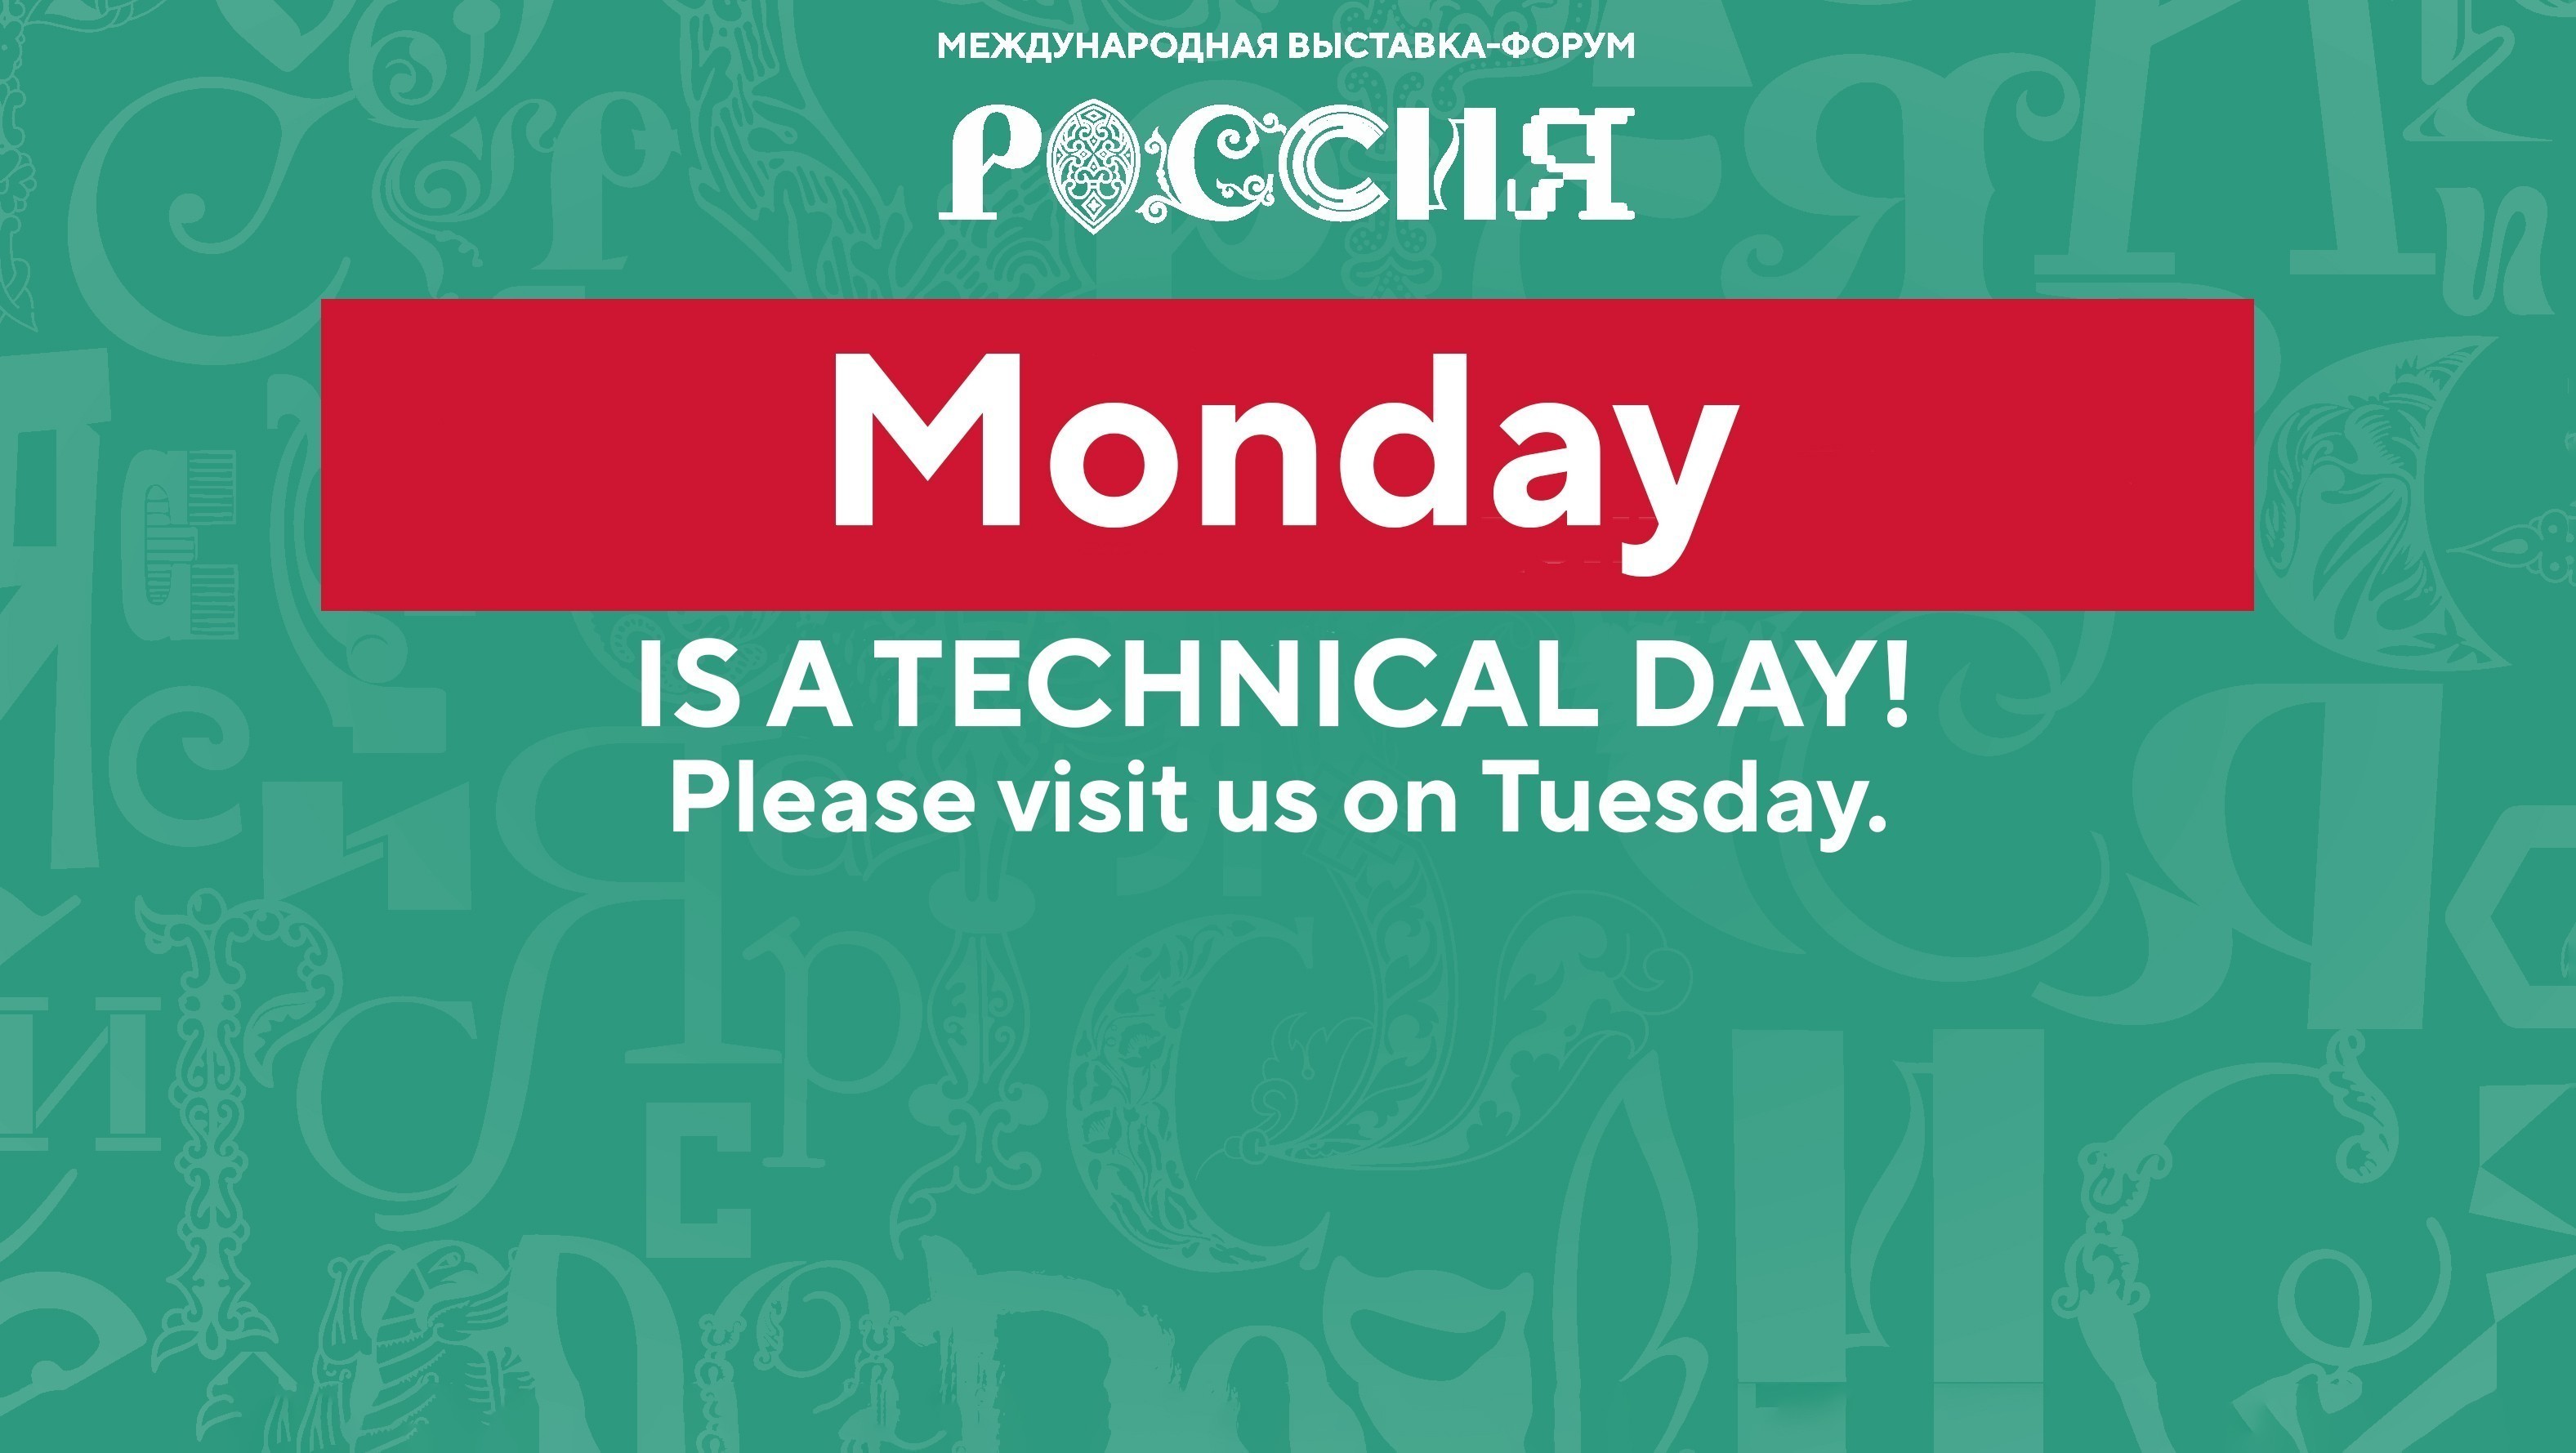 Monday, June 17 is a technical day